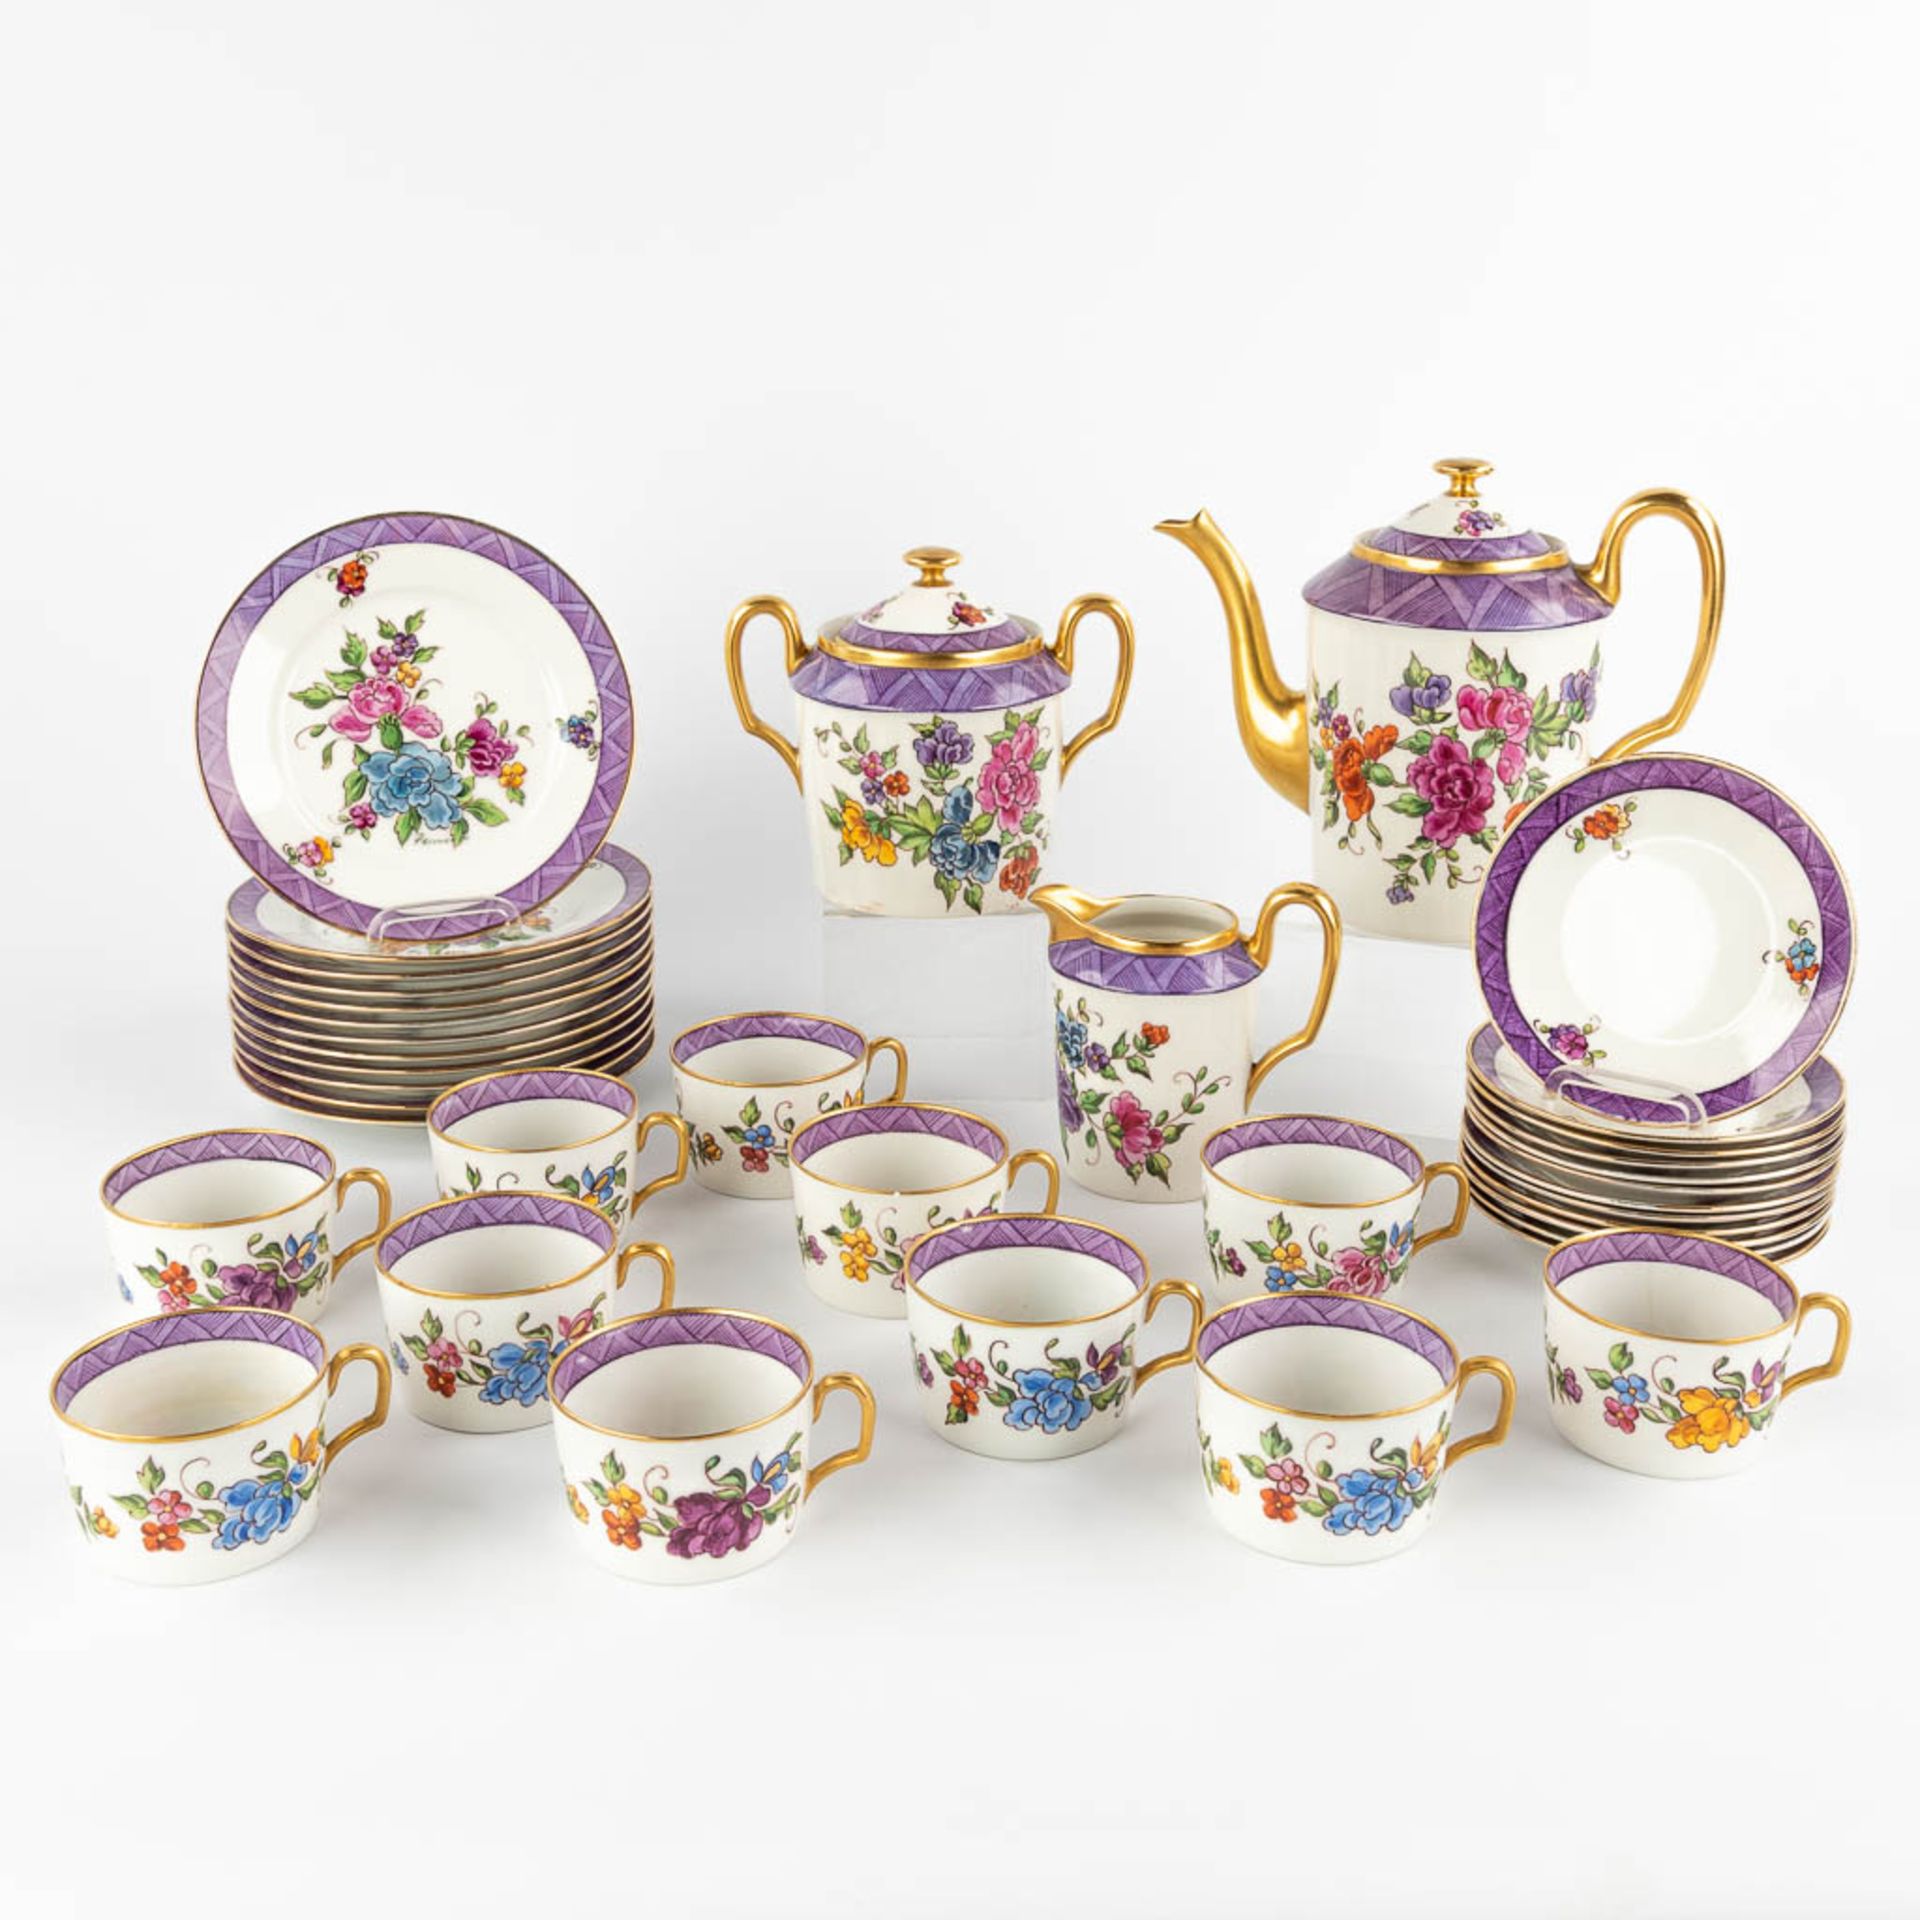 Limoges 'Primrose' a 12-person porcelain coffee service with hand-painted decor. (D:13 x W:24 x H:20